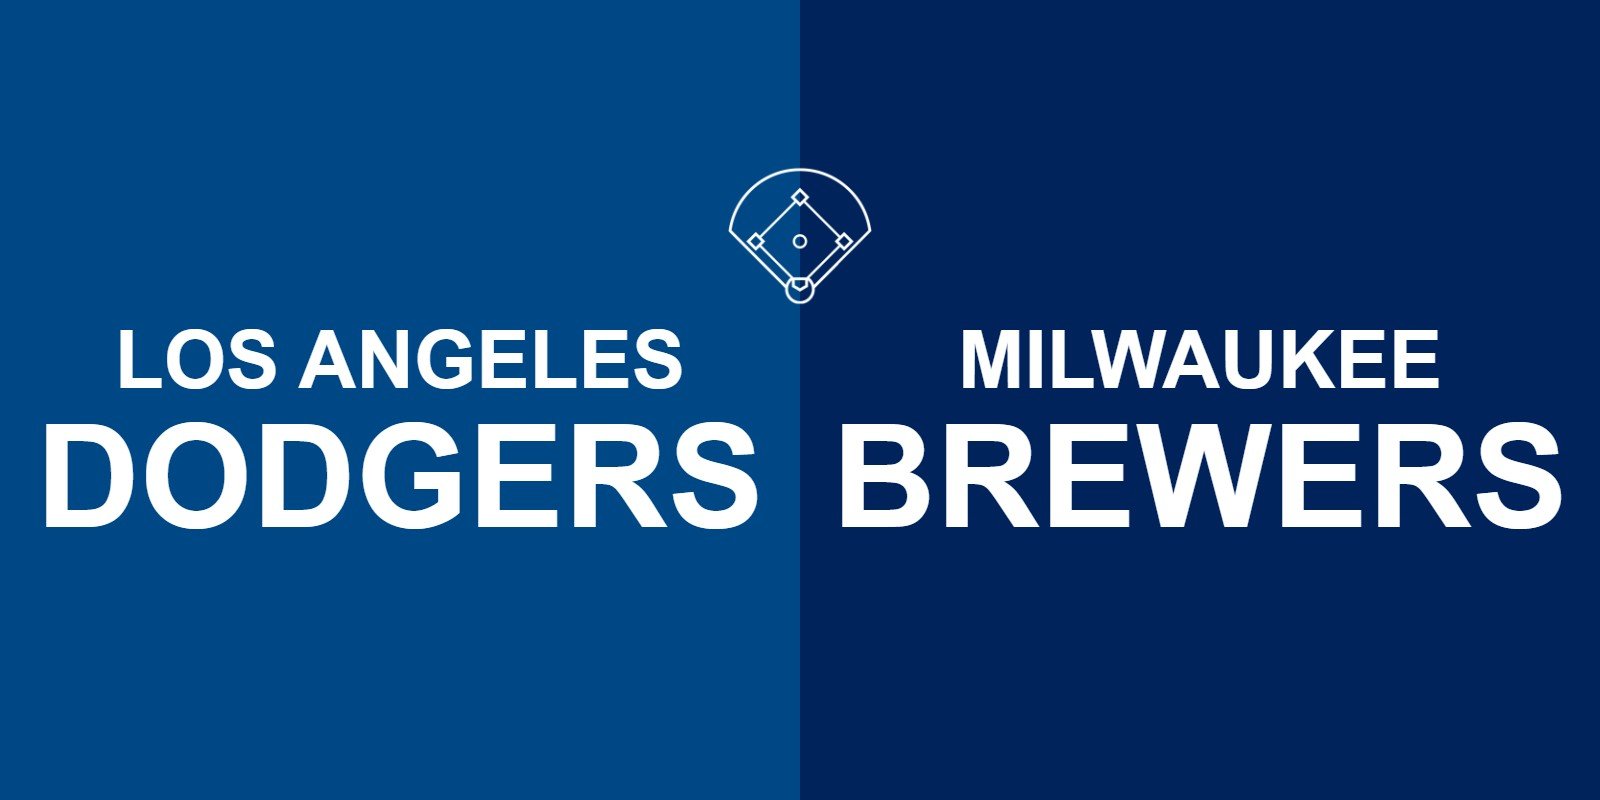 Dodgers vs Brewers